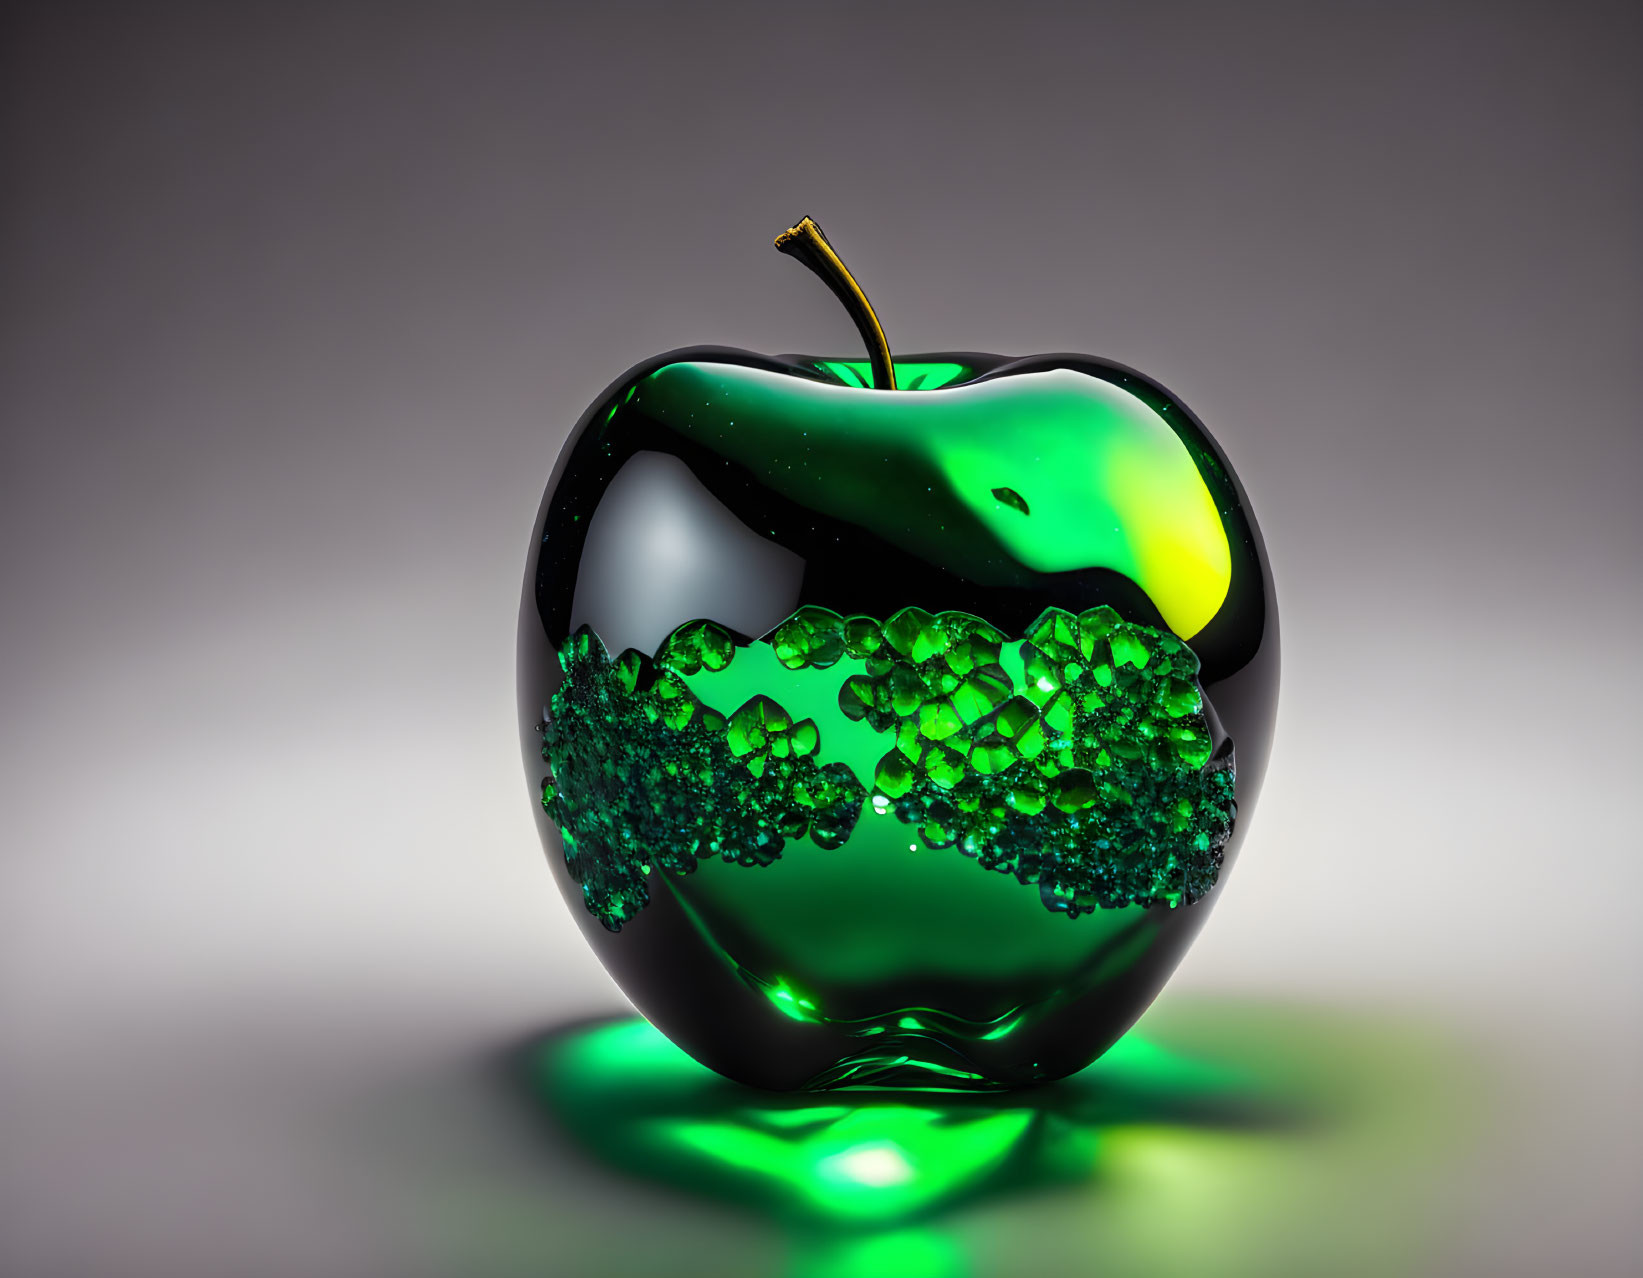 Green apple with bubble-like structures for a unique look